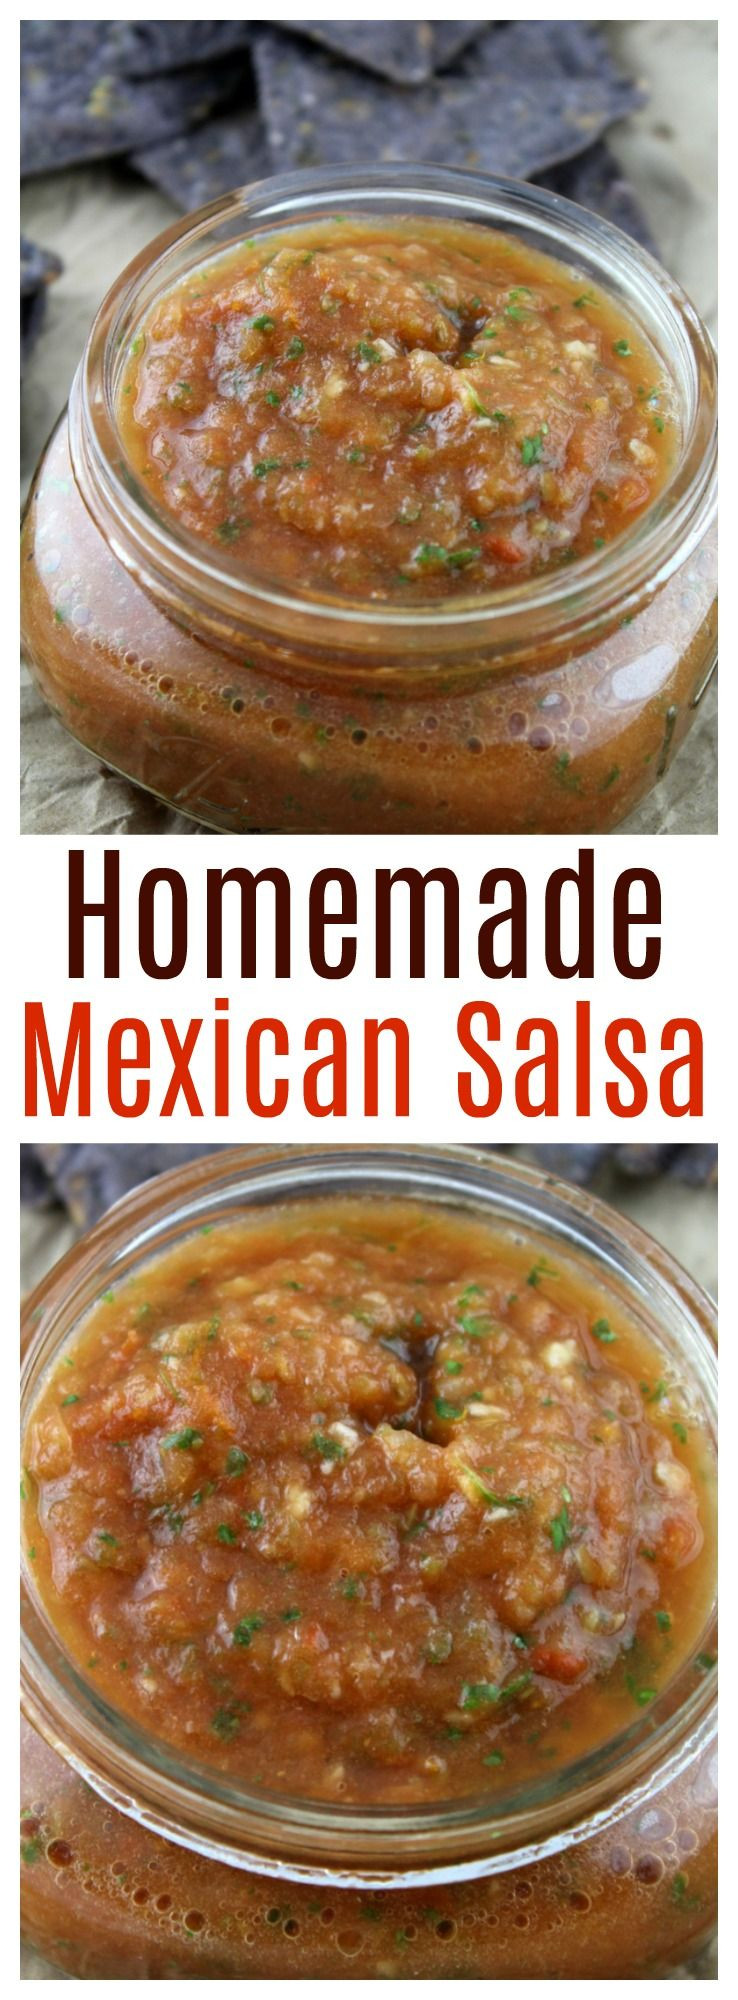 Authentic Mexican Salsas Recipes
 Whip up this easy authentic homemade Mexican salsa in